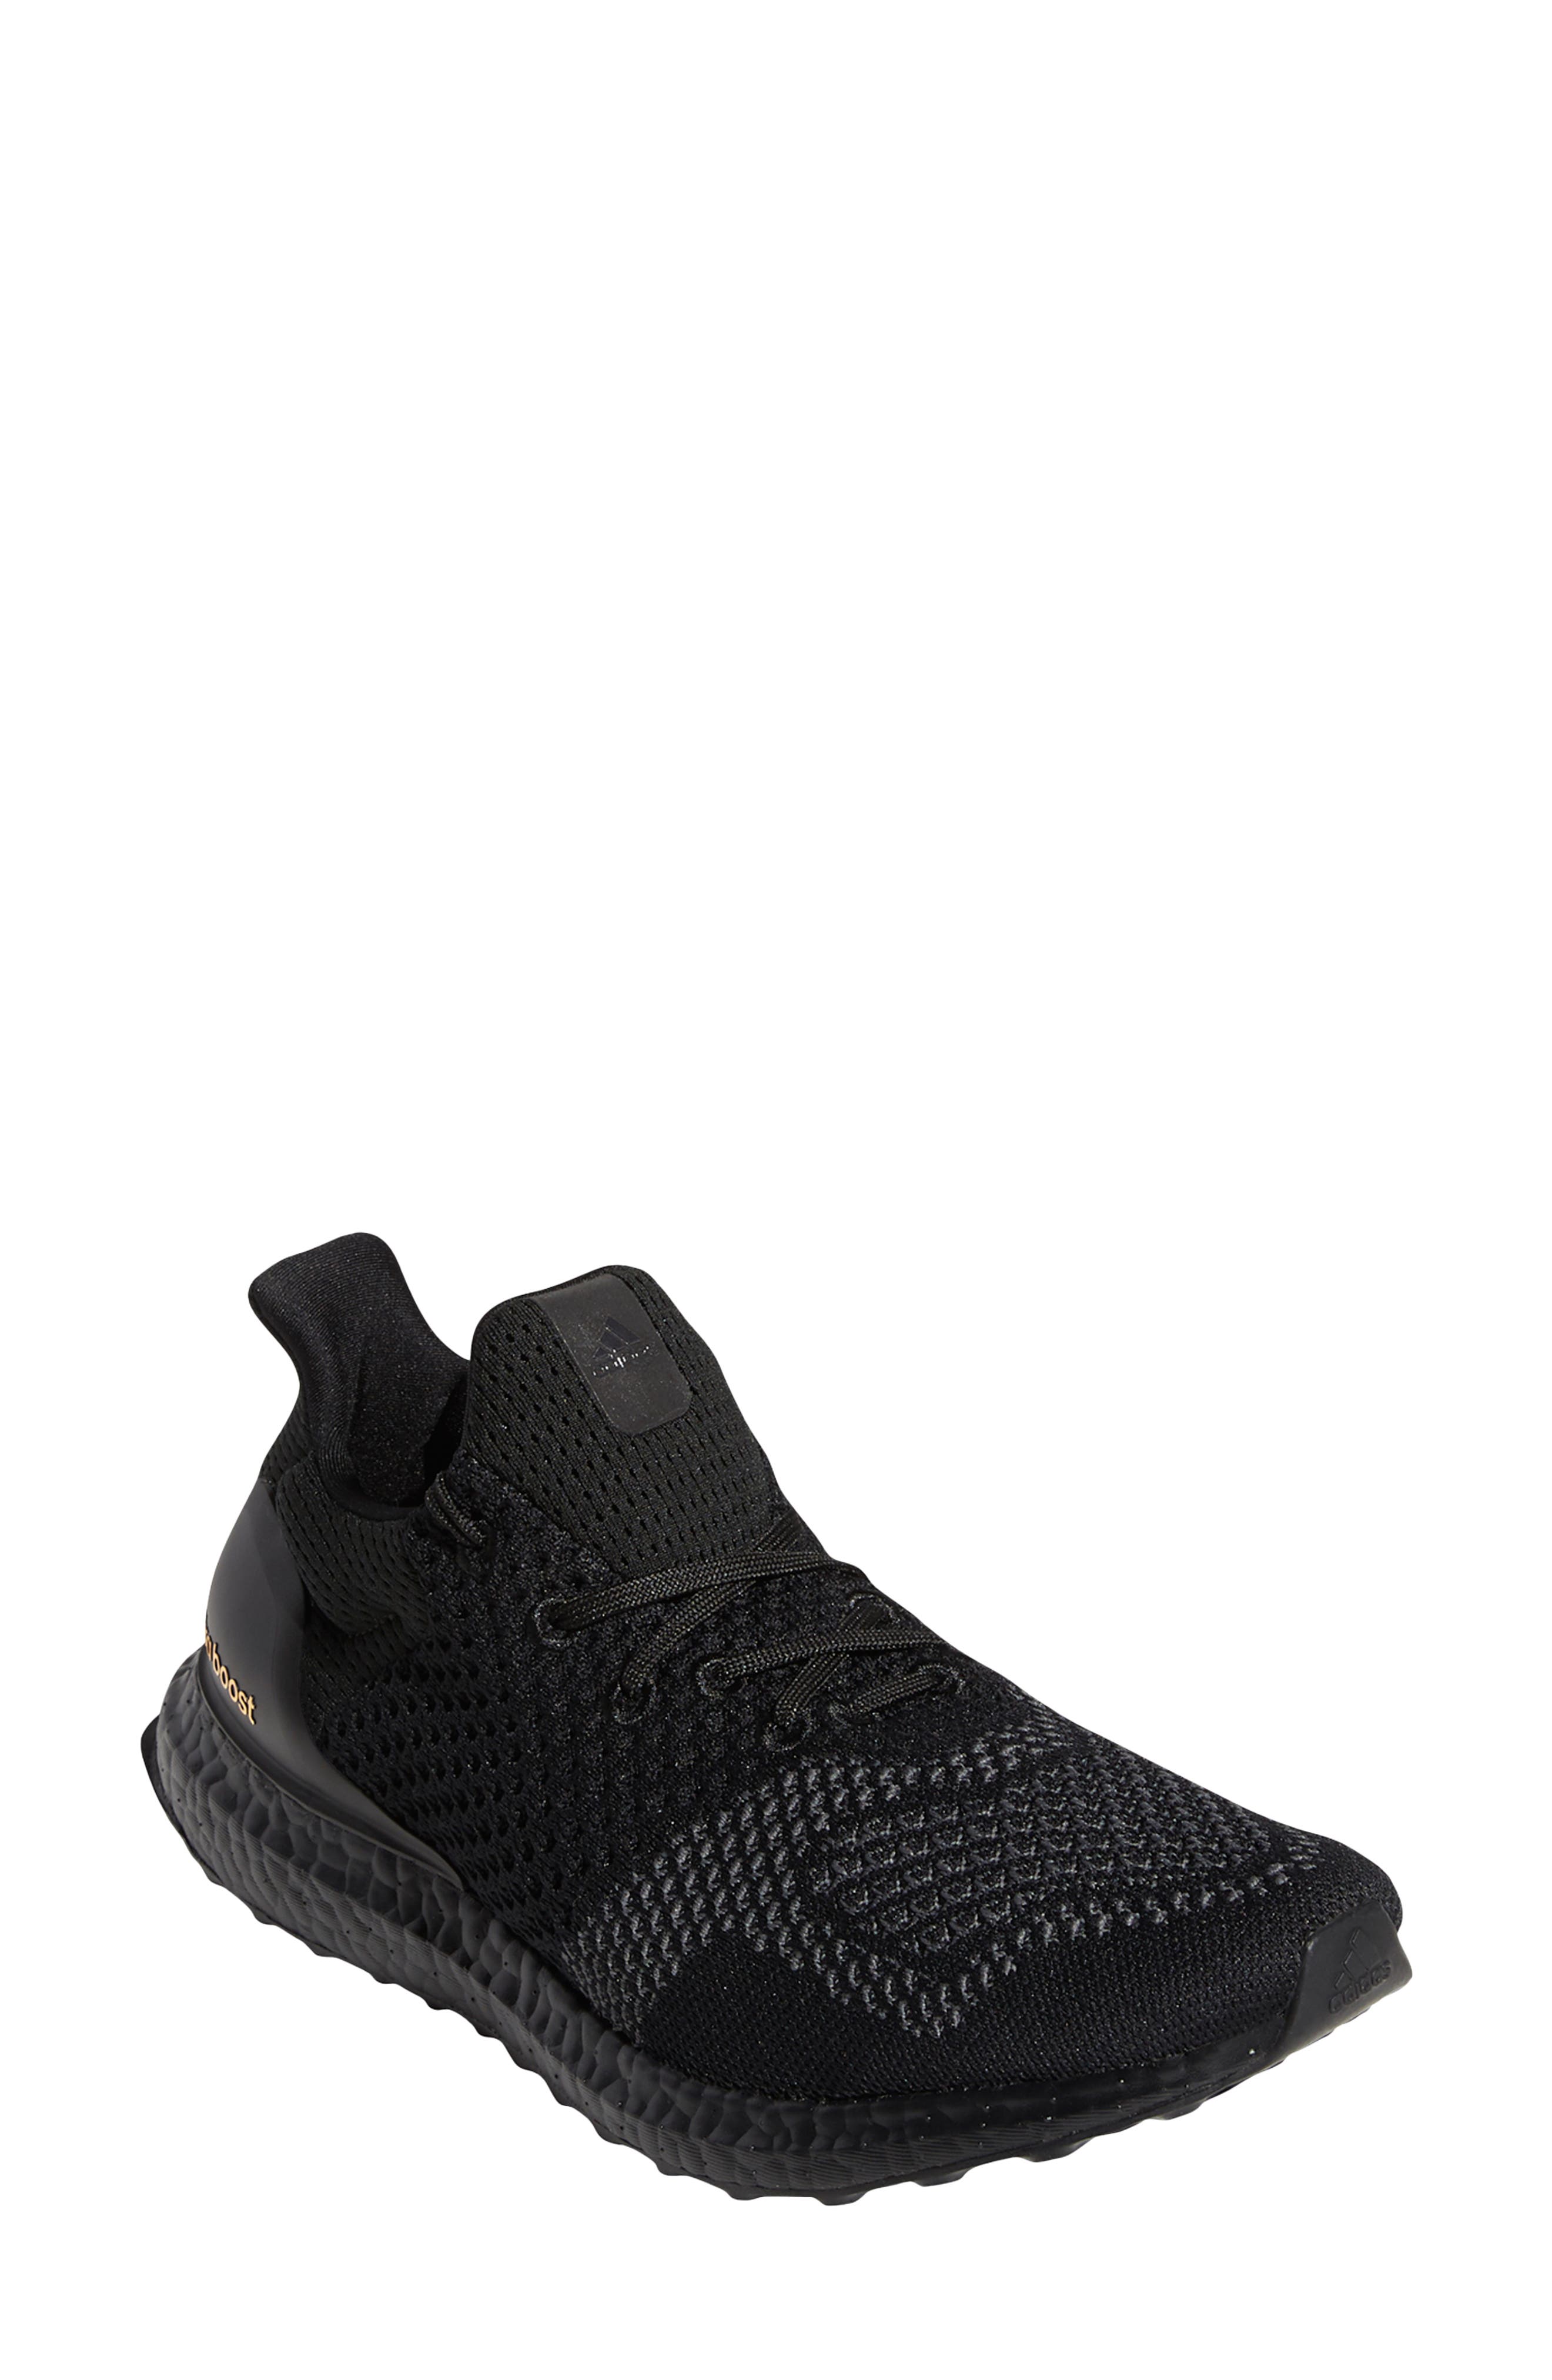 nordstrom mens adidas shoes